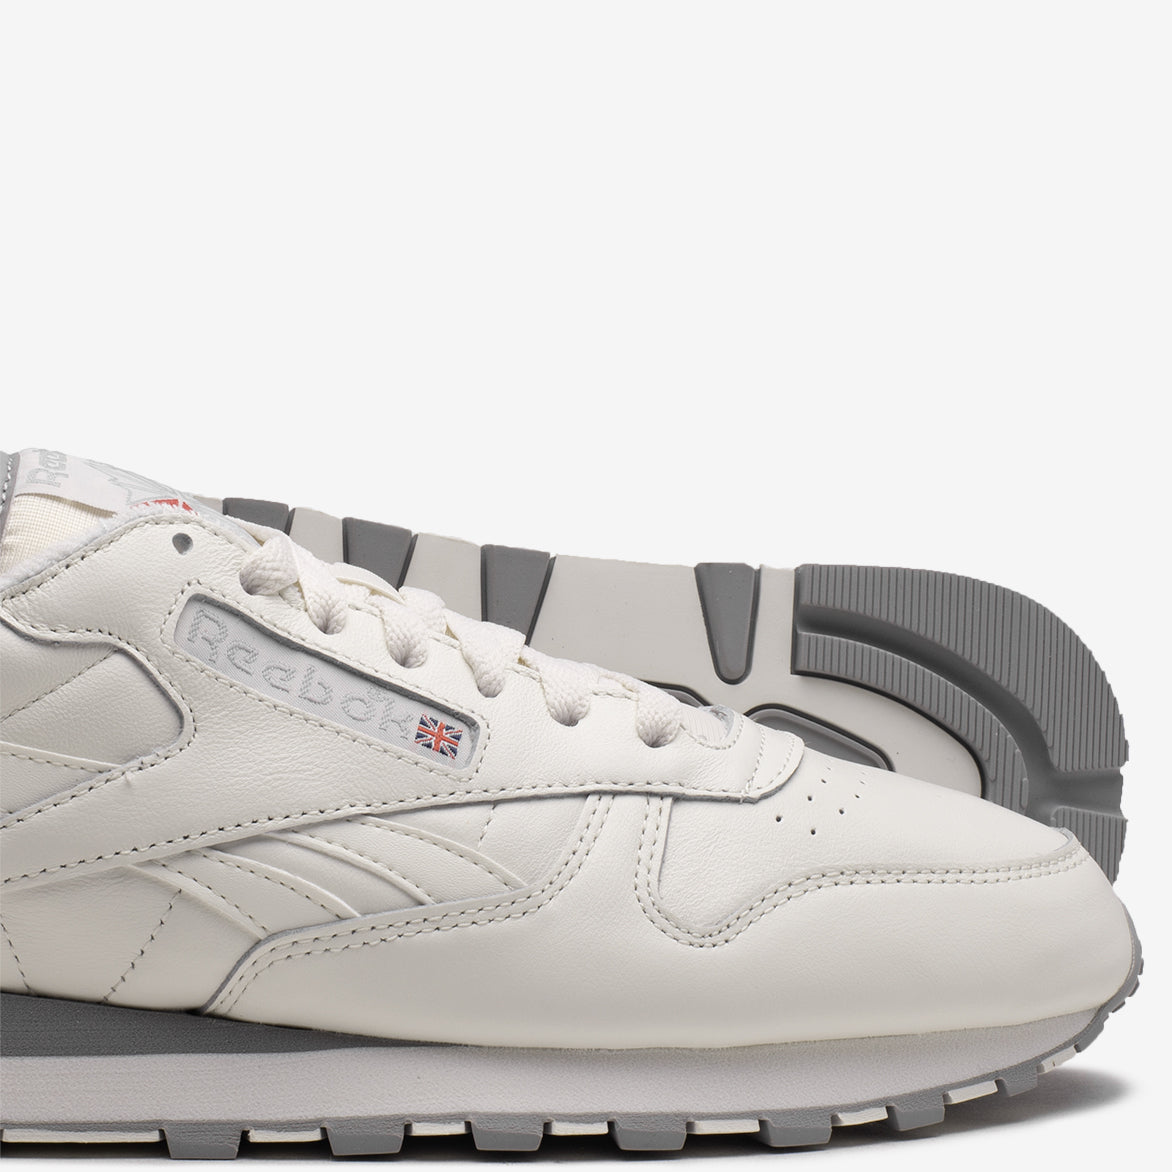 Reebok Classic Leather 1983 Vintage Chalk/Vector Red